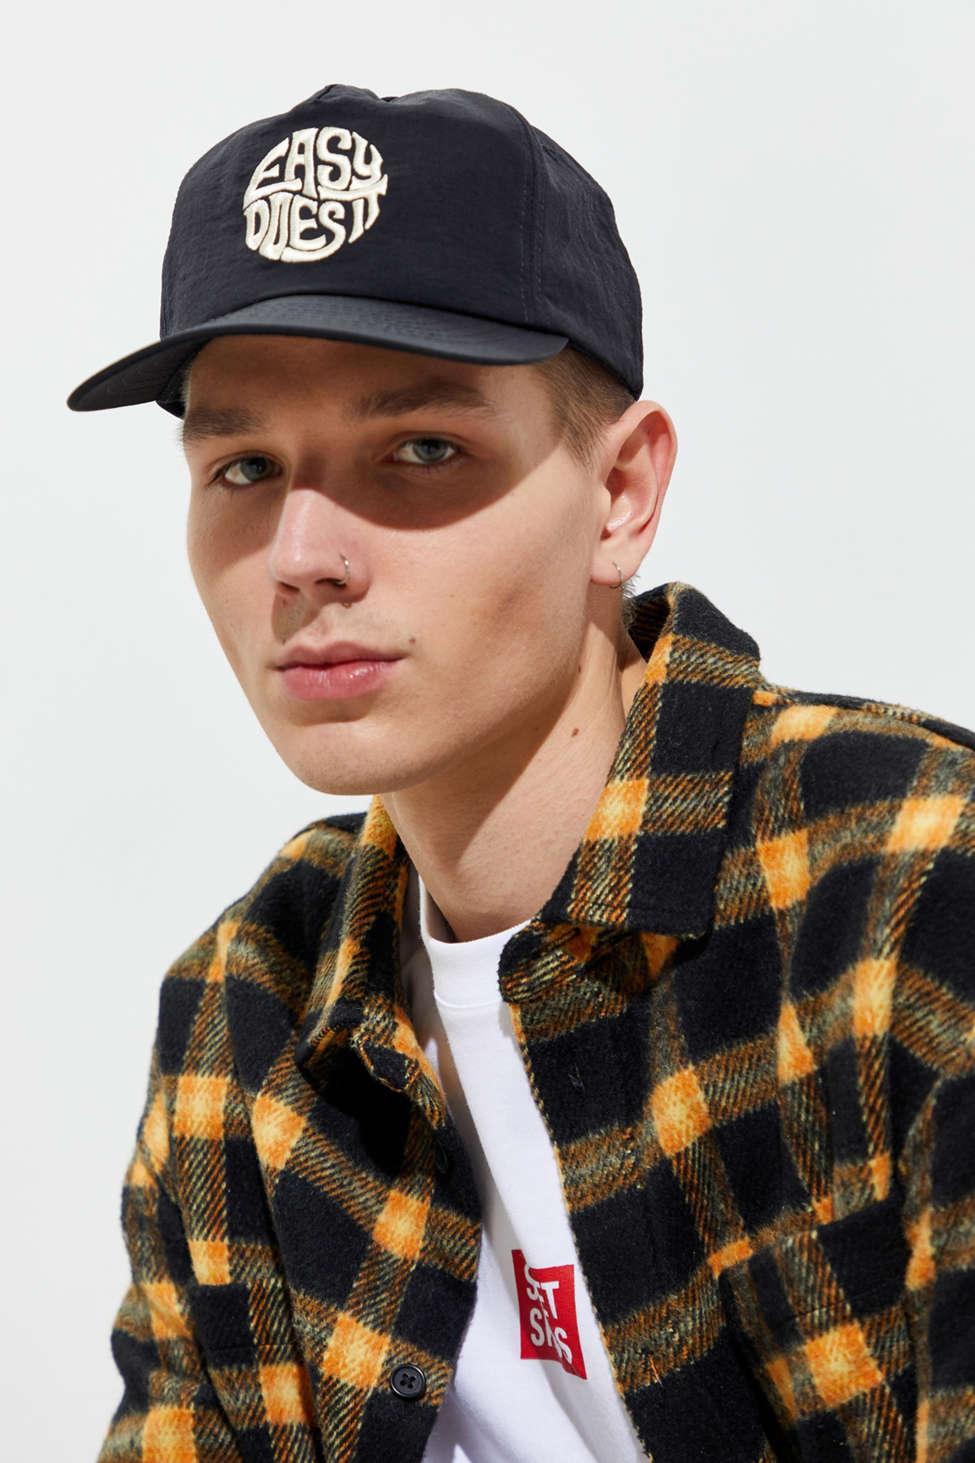 Katin Easy Does It Embroidered Snapback Hat for Men | Lyst